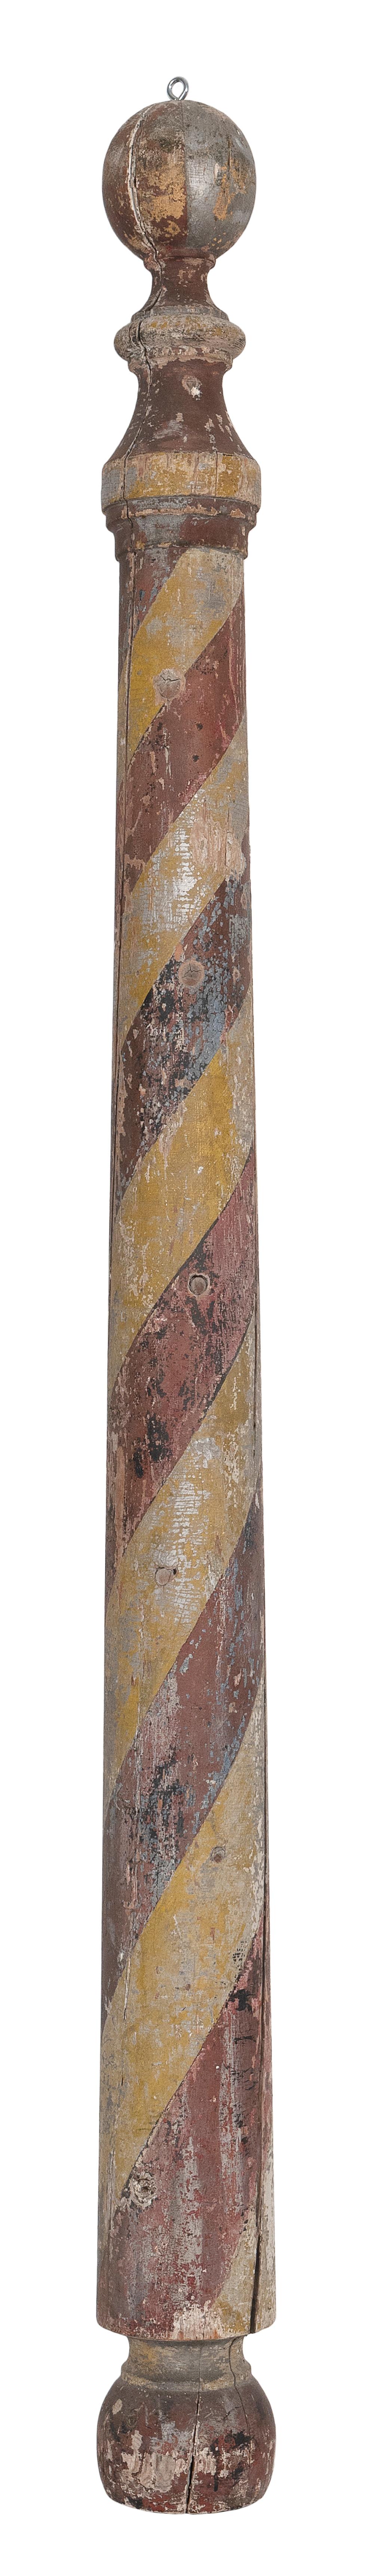 PAINTED WOODEN BARBER S POLE 19TH 34ffae